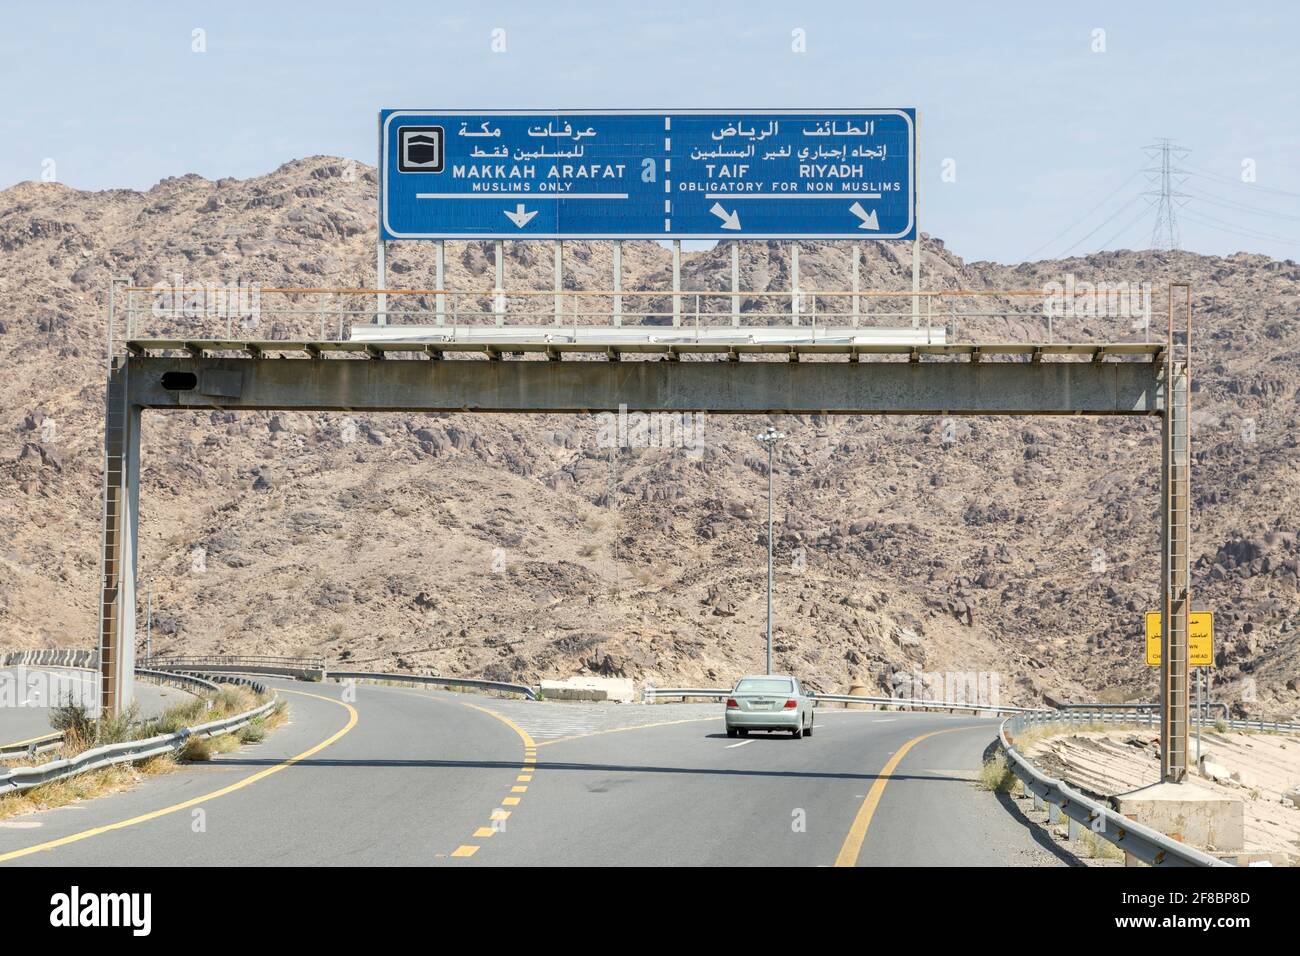 Makkah, Saudi Arabia, February 22 2020: Road sign in the vicinity of Mecca that non Muslims do have to drive around the holy city Mecca in Saudi Arabi Stock Photo